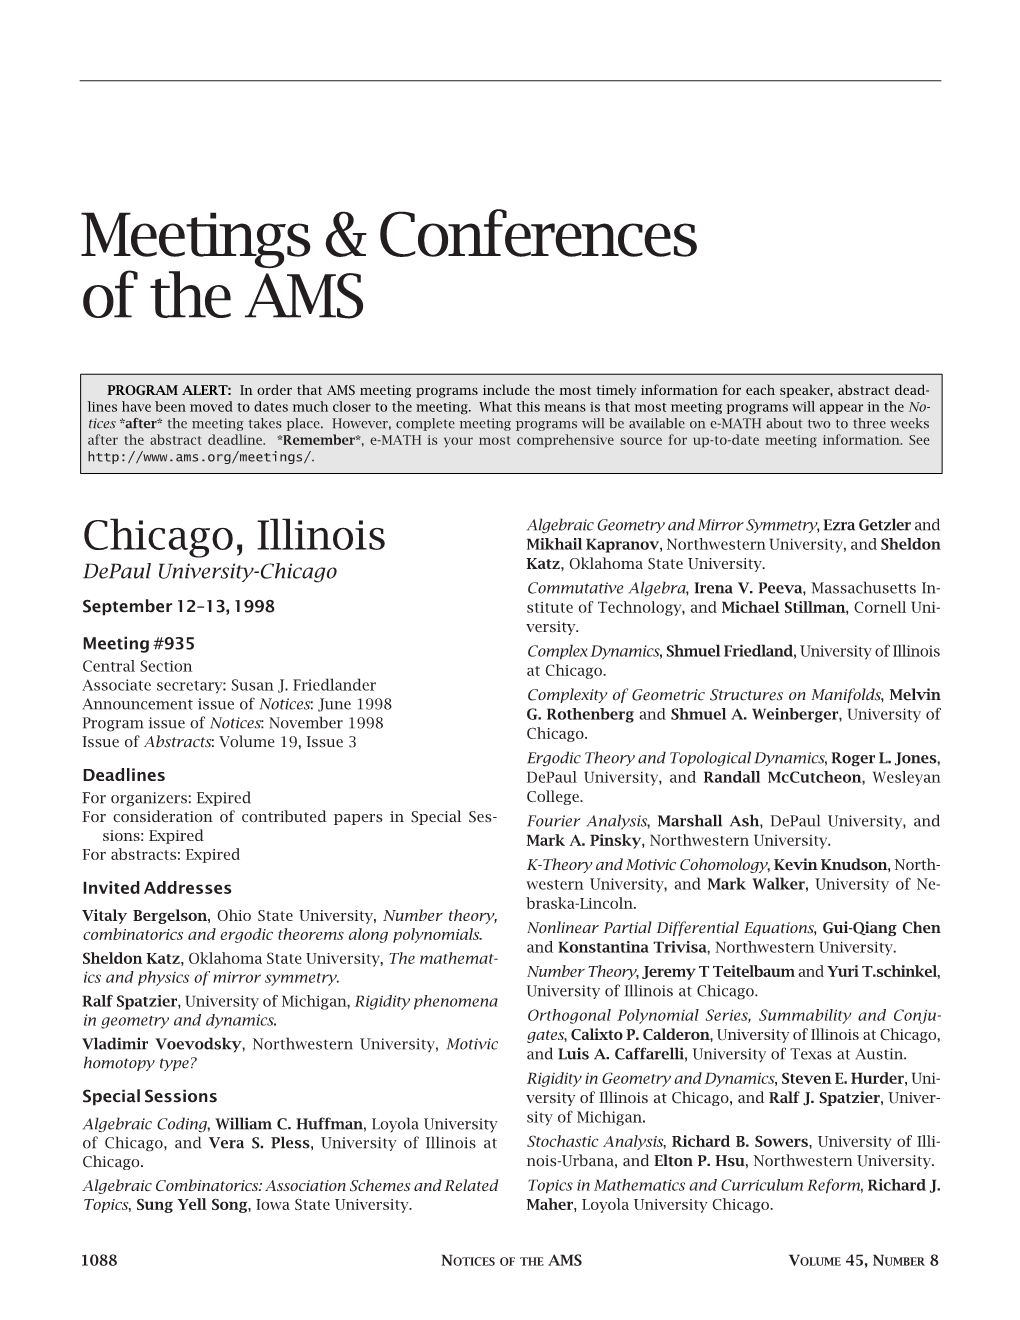 Meetings and Conferences, Volume 45, Number 8